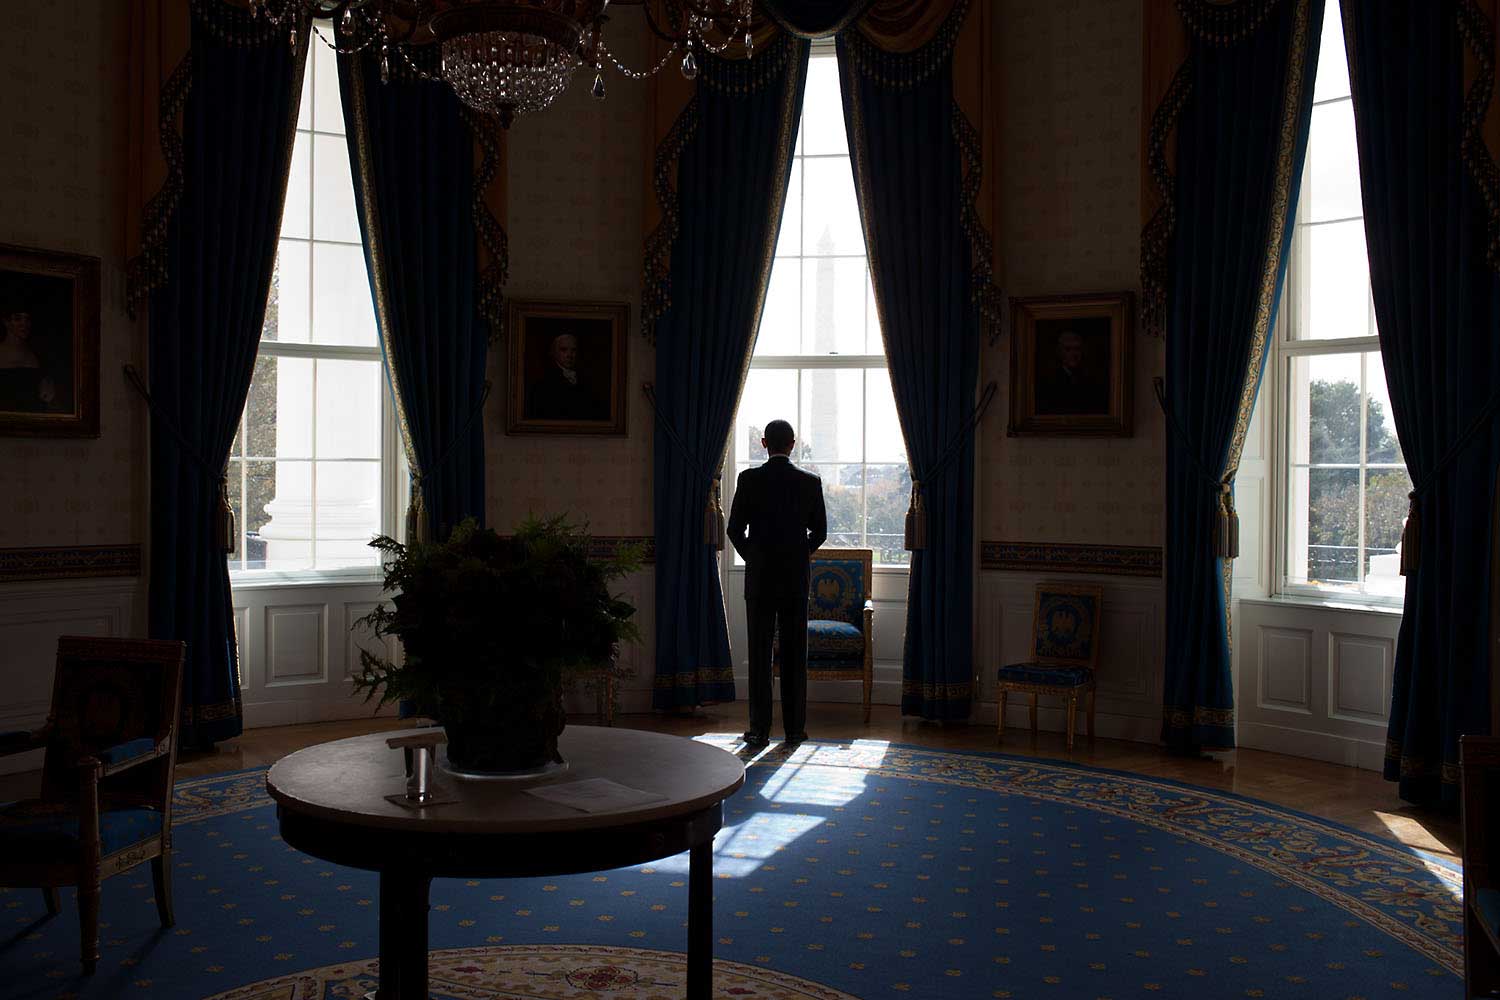 The day after the mid-term election, the President waits in the Blue Room of the White House before facing the press at a news conference in the East Room, Nov. 3, 2010.